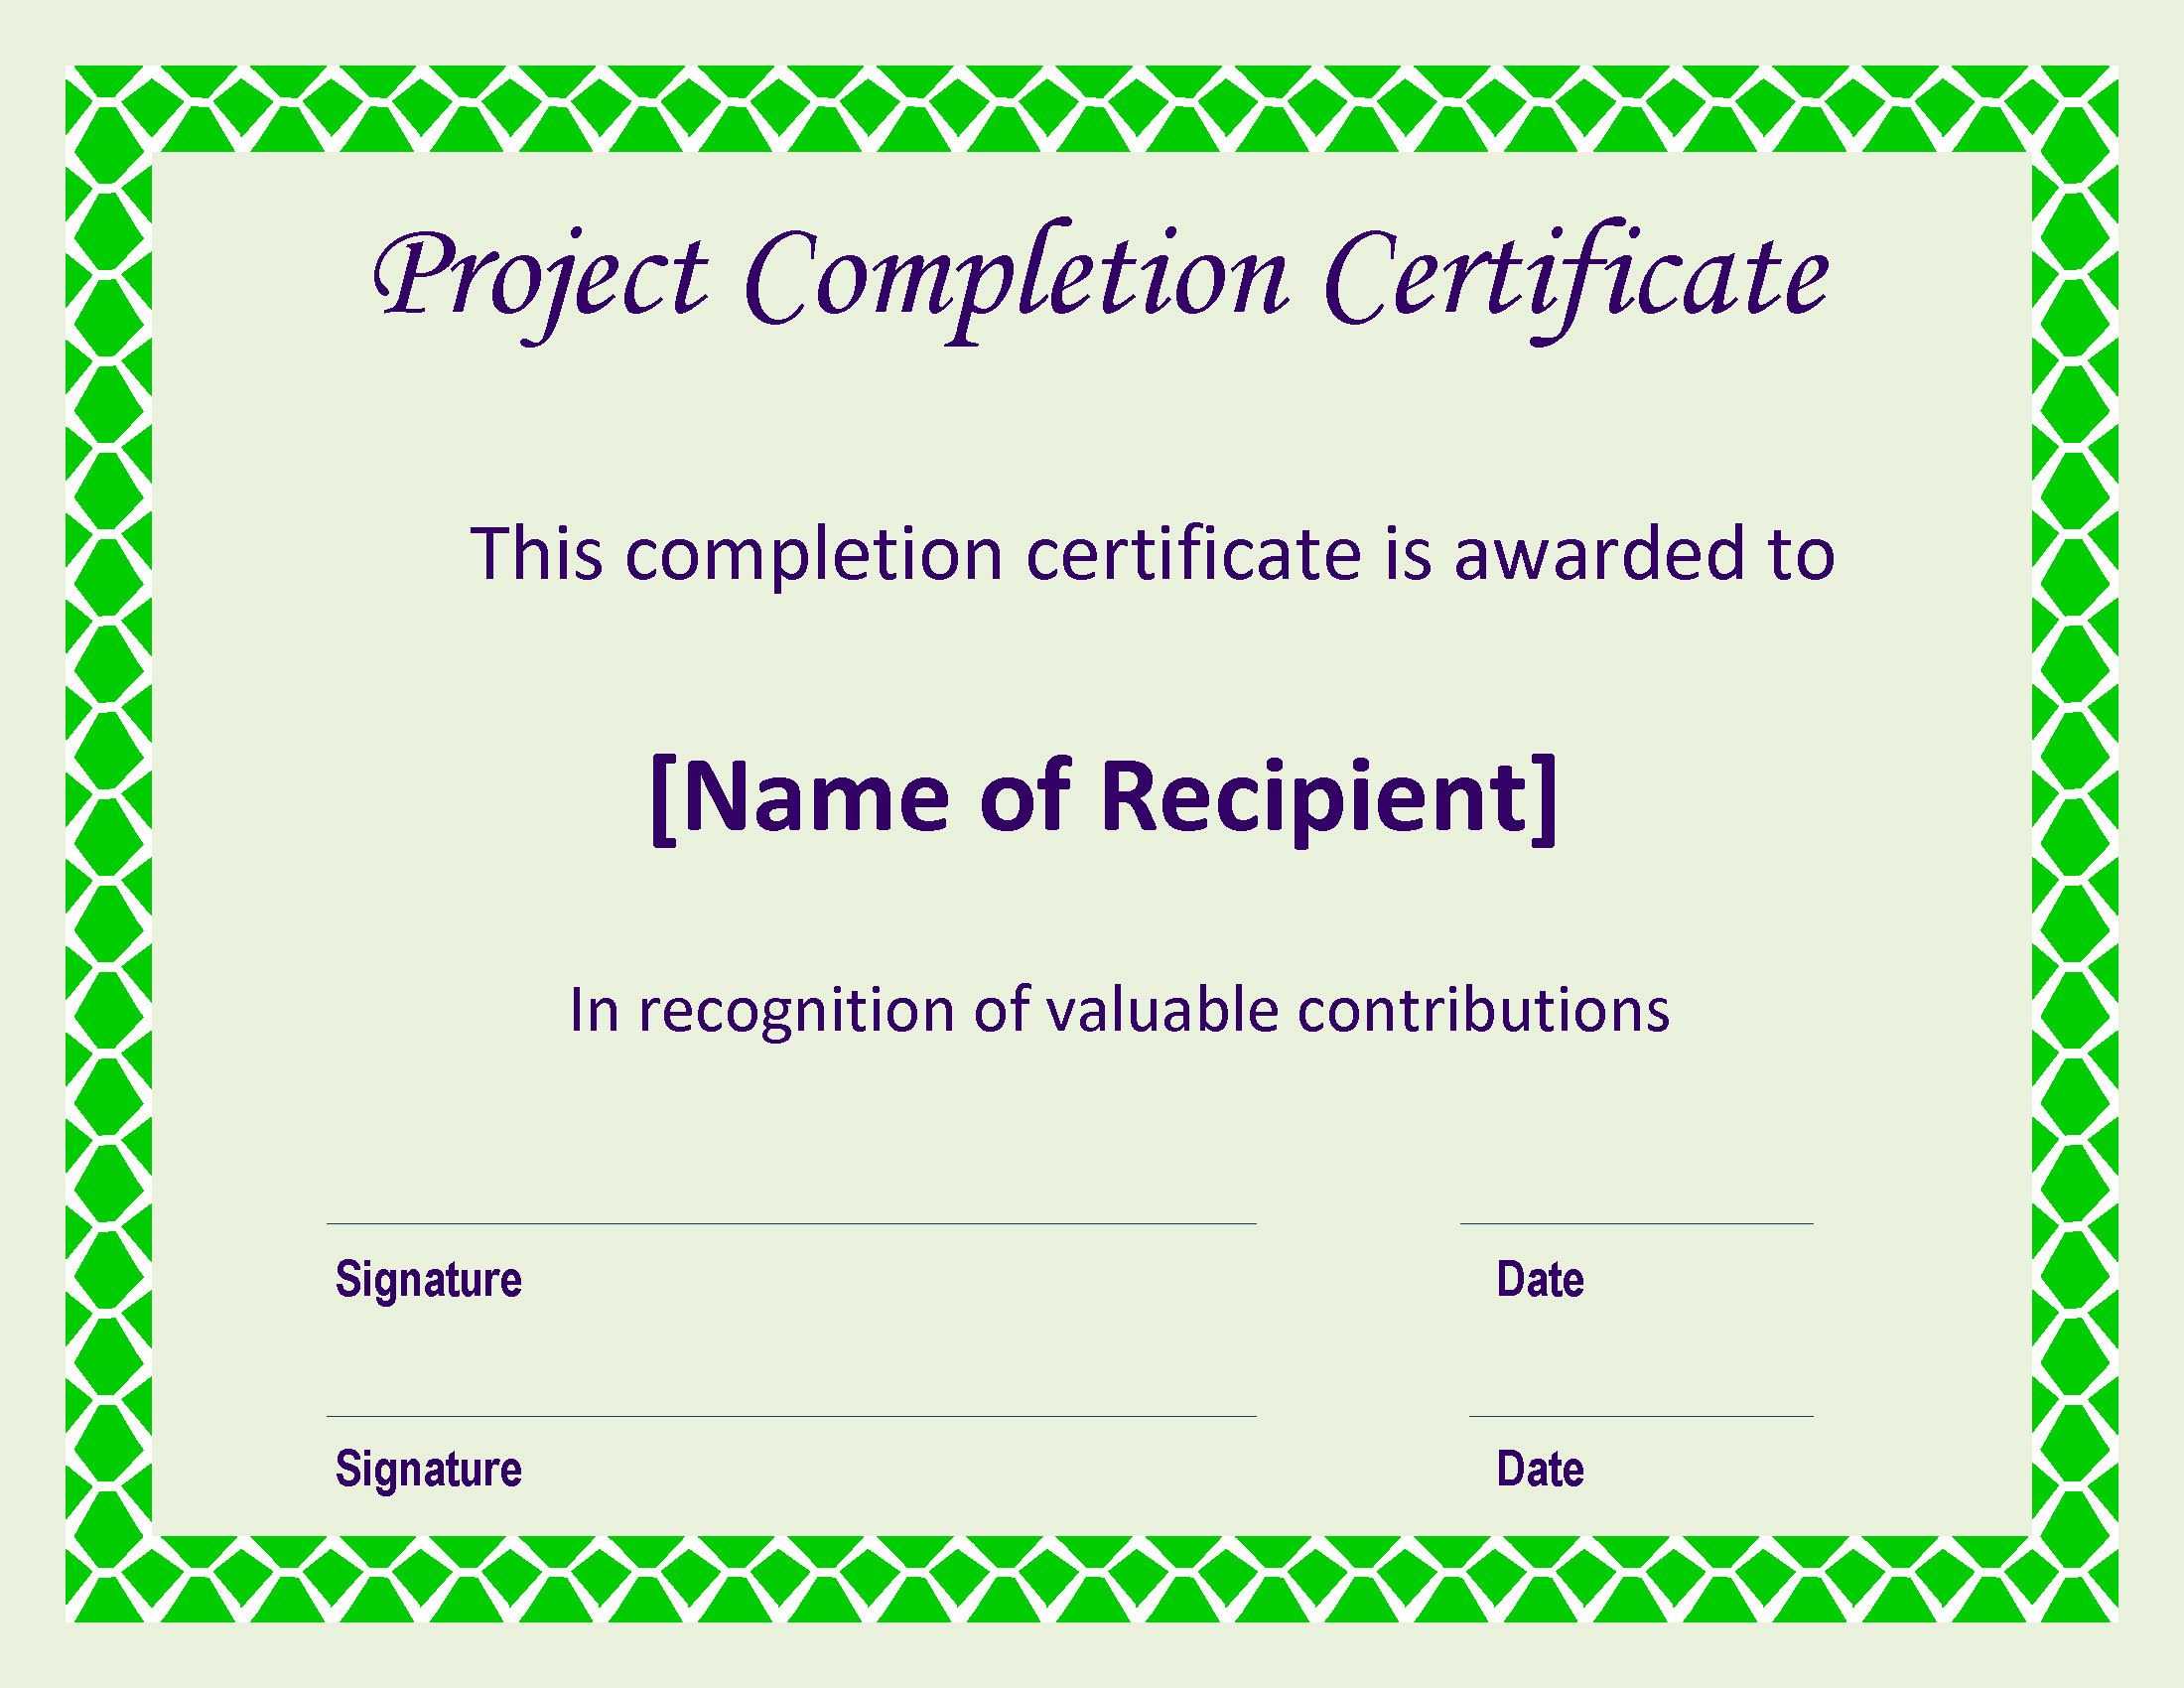 Certificate Of Completion Project | Templates At Inside Certificate Of Completion Construction Templates